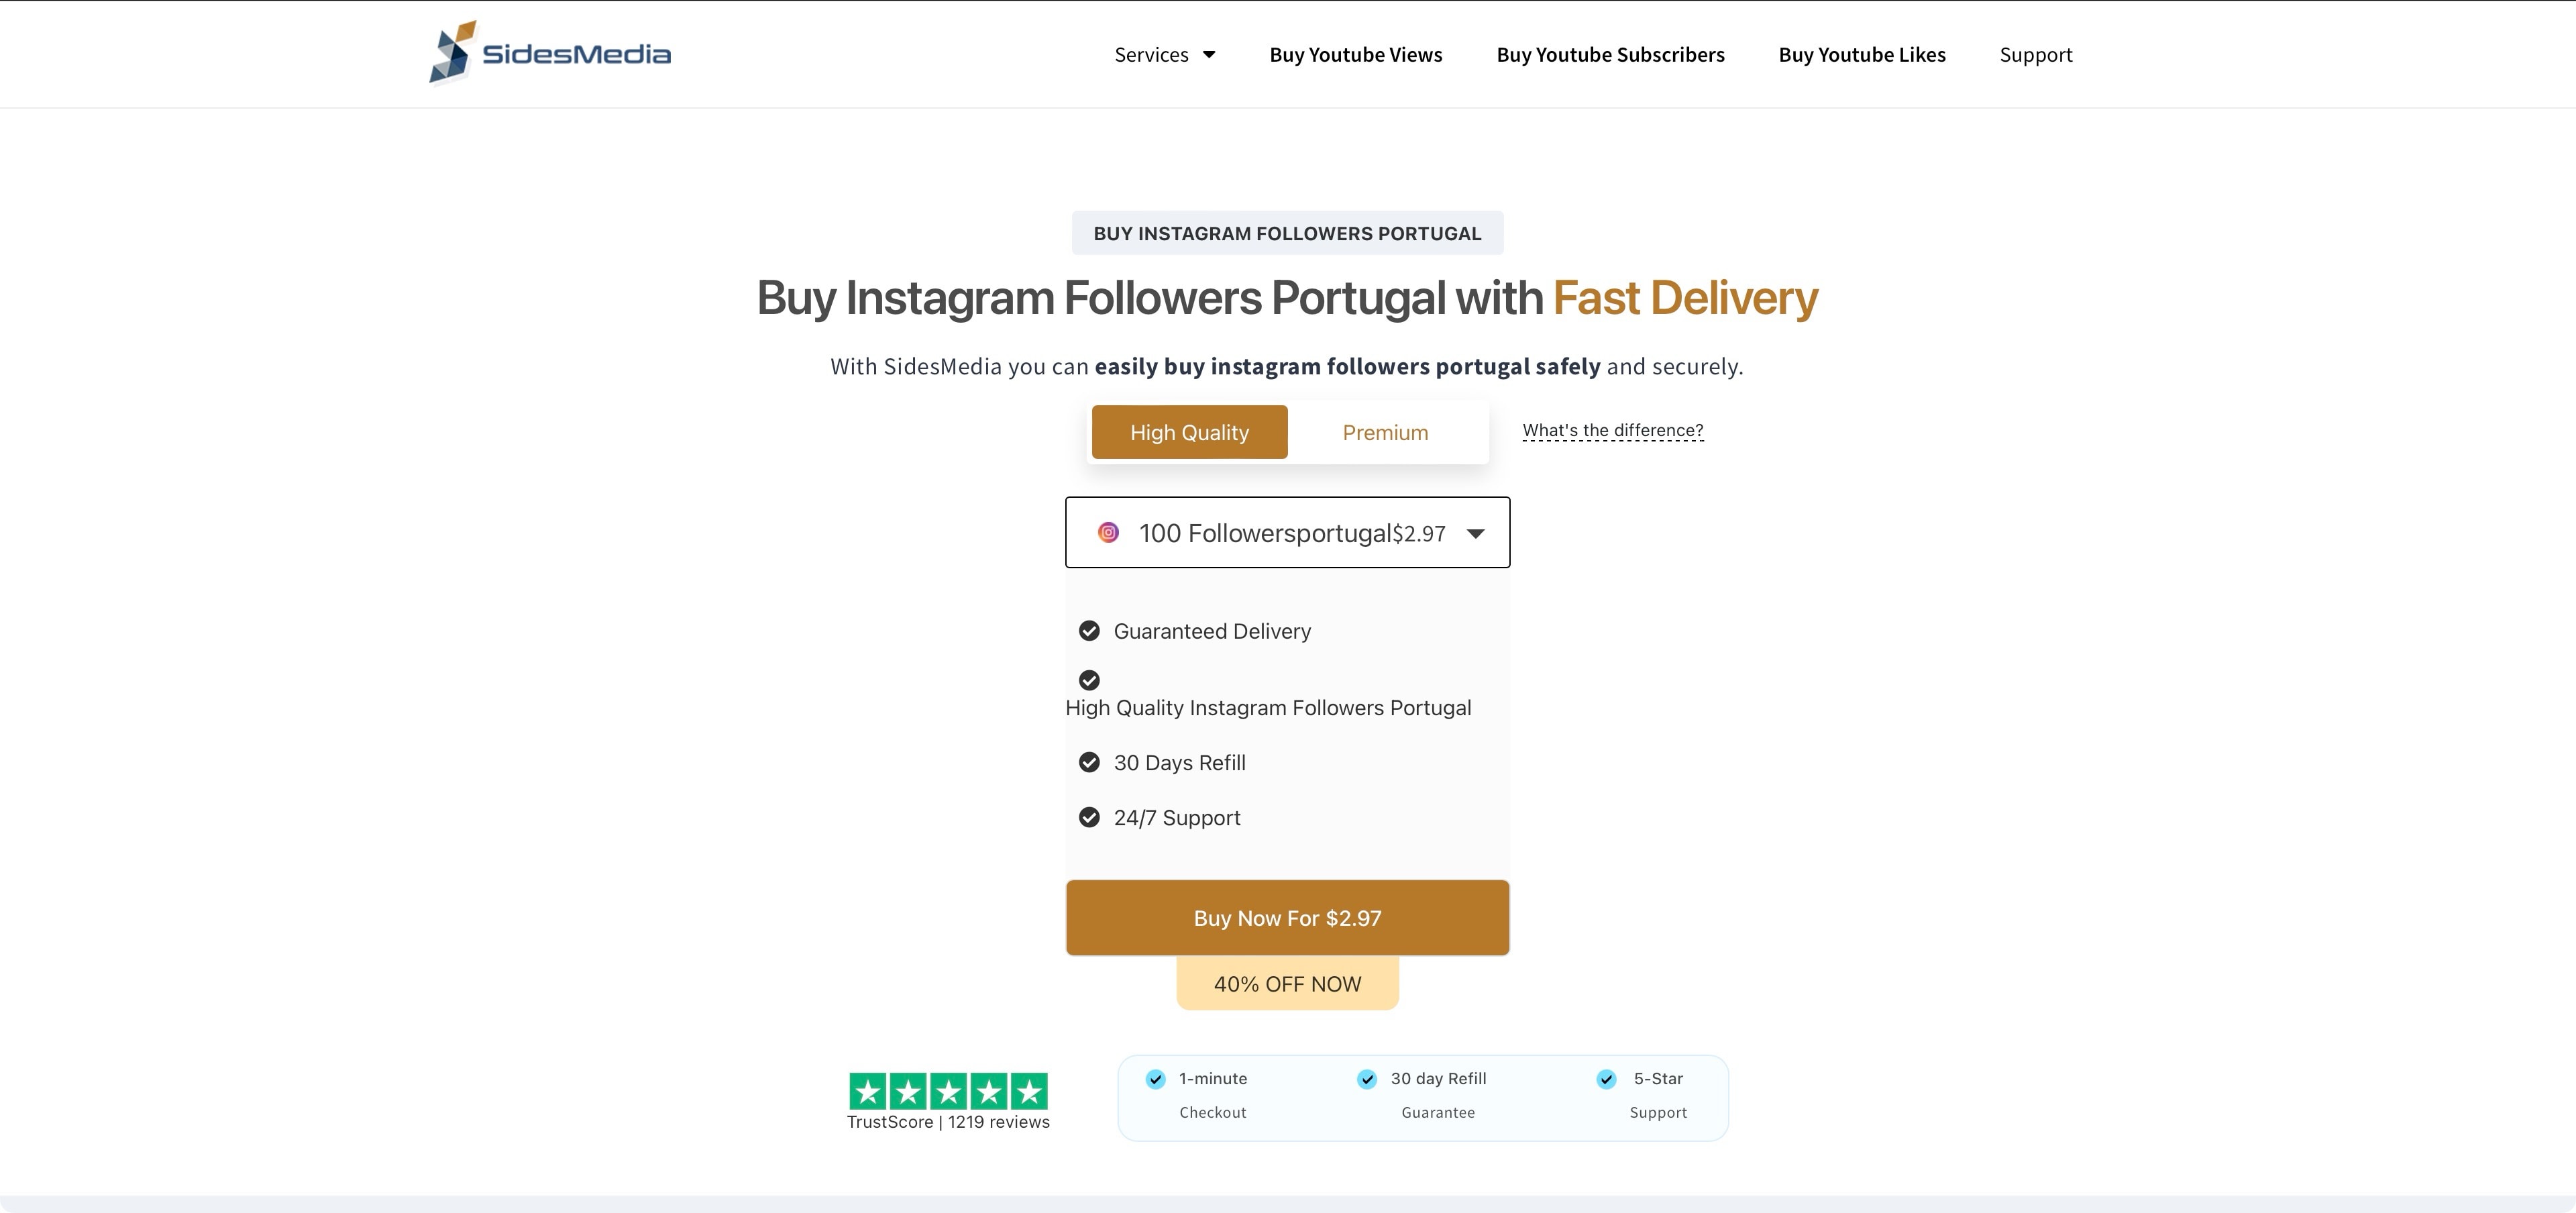 sidesmedia buy instagram followers portugal page